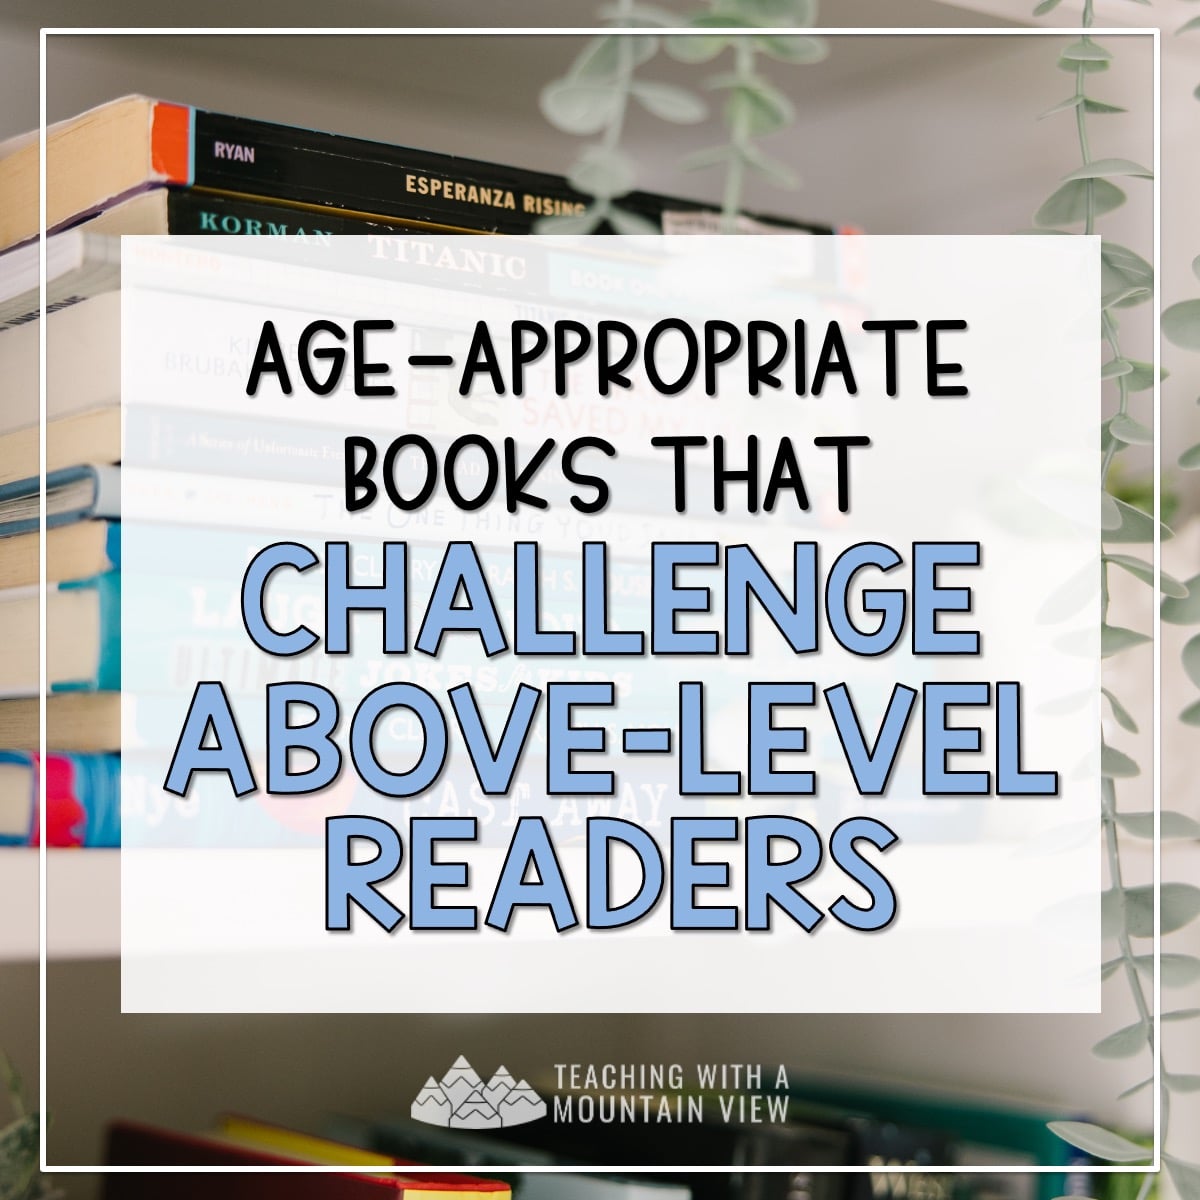 Use these book recommendations to find age-appropriate books for advanced readers in upper elementary and meet the unique needs of all readers.